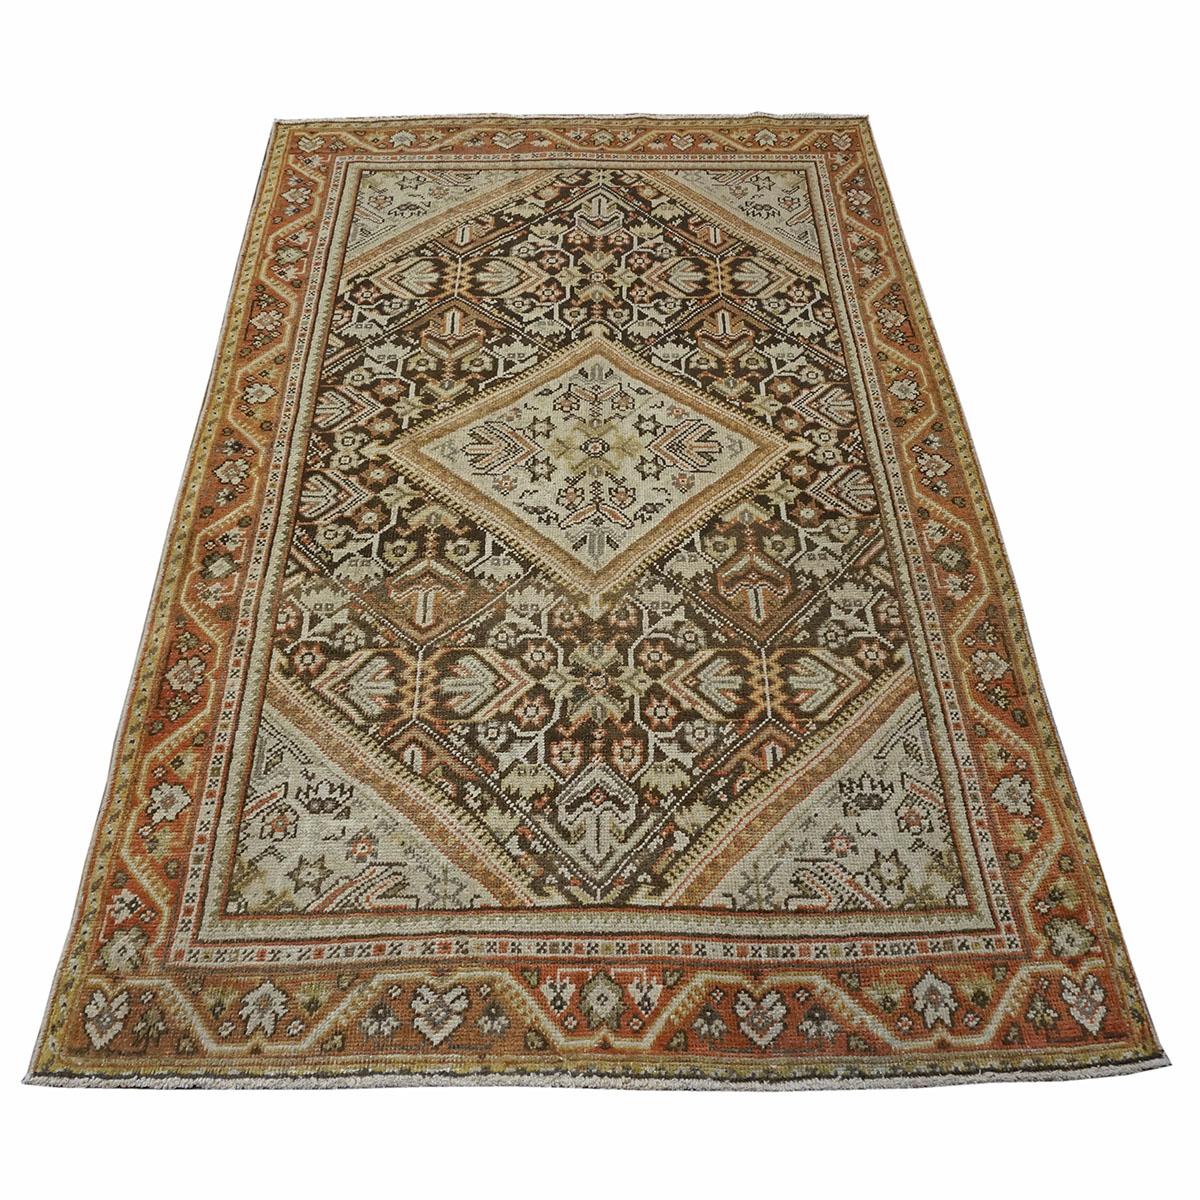 Ashly Fine Rugs presents a 1930s Antique Persian Mahal 4 x 6 handmade area rug #1142800. This beautiful Antique Persian rug is in good to excellent condition and has a brown background with the border, design, and details consisting of rust, tan,